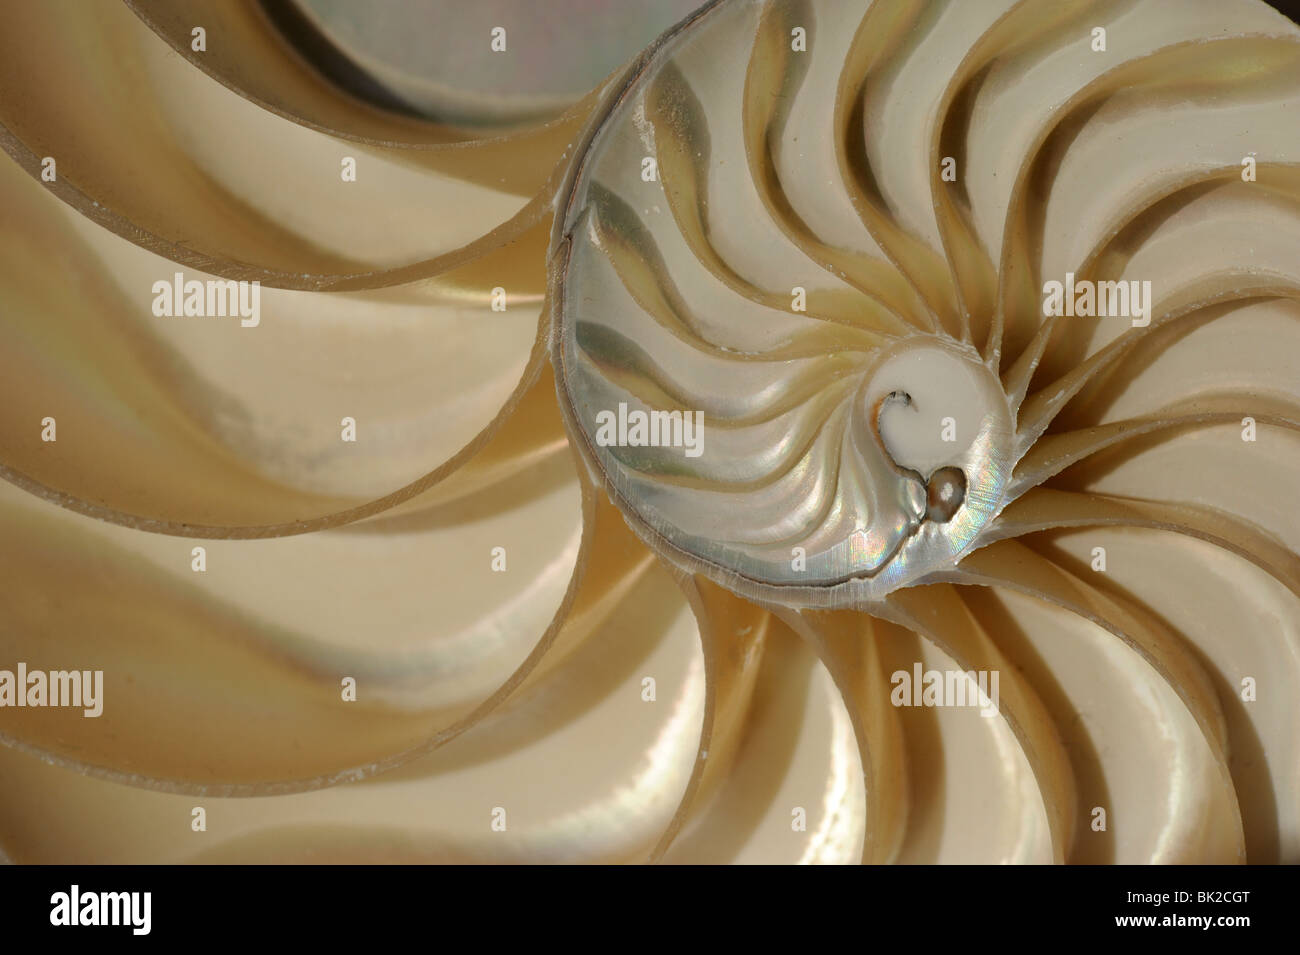 Chambered Nautilus (Nautilus pompilius) cross section of shell showing chambers. Stock Photo